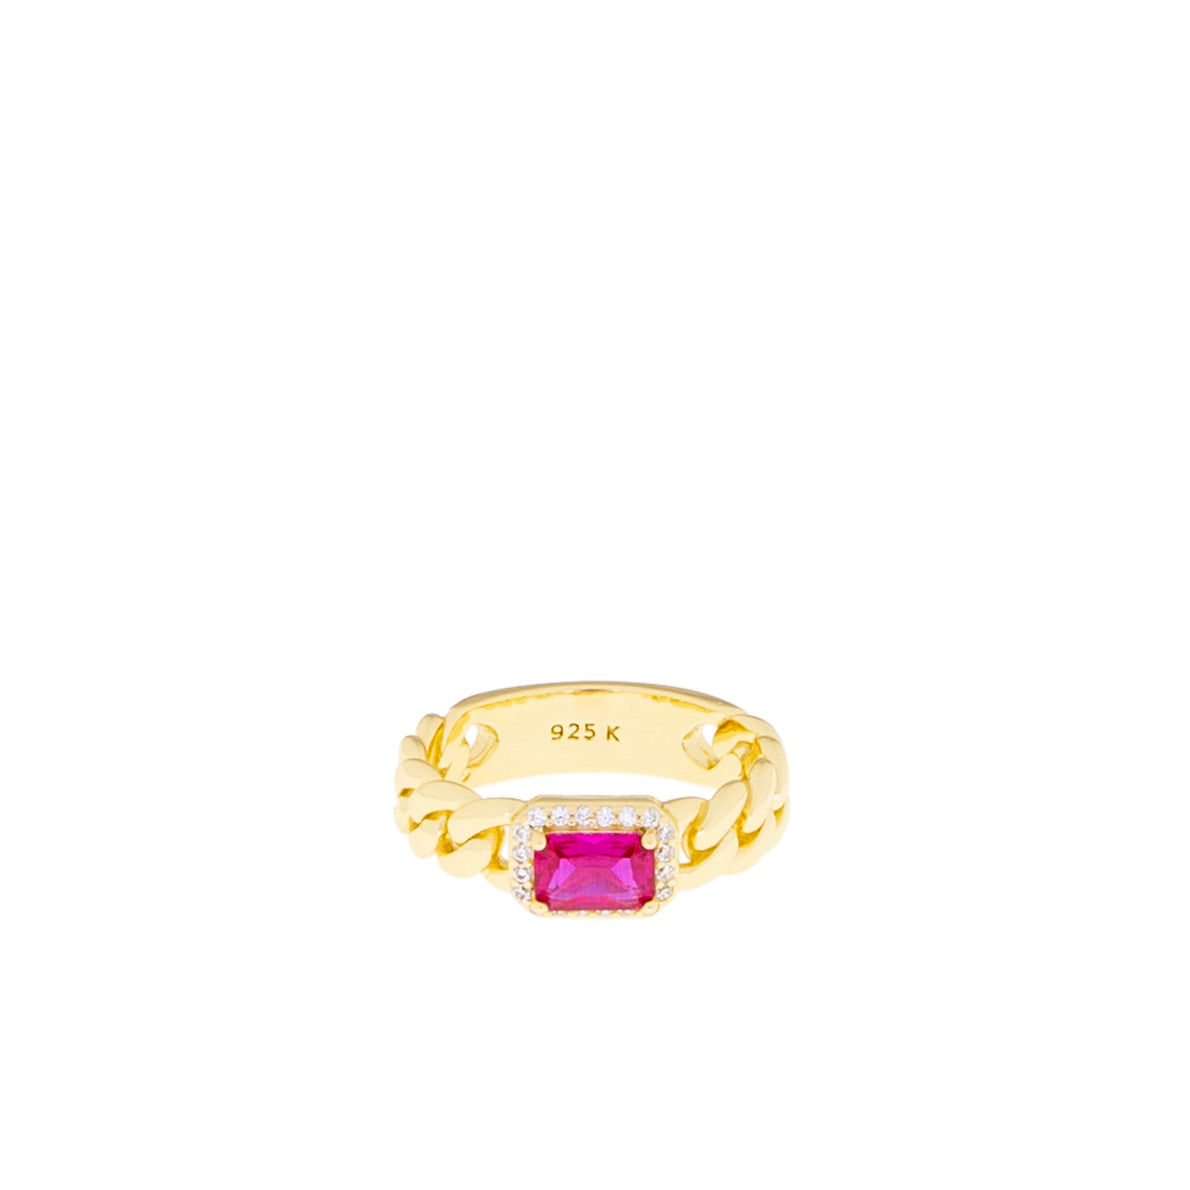 sterling silver/ gold plated braided emerald cut stone ring